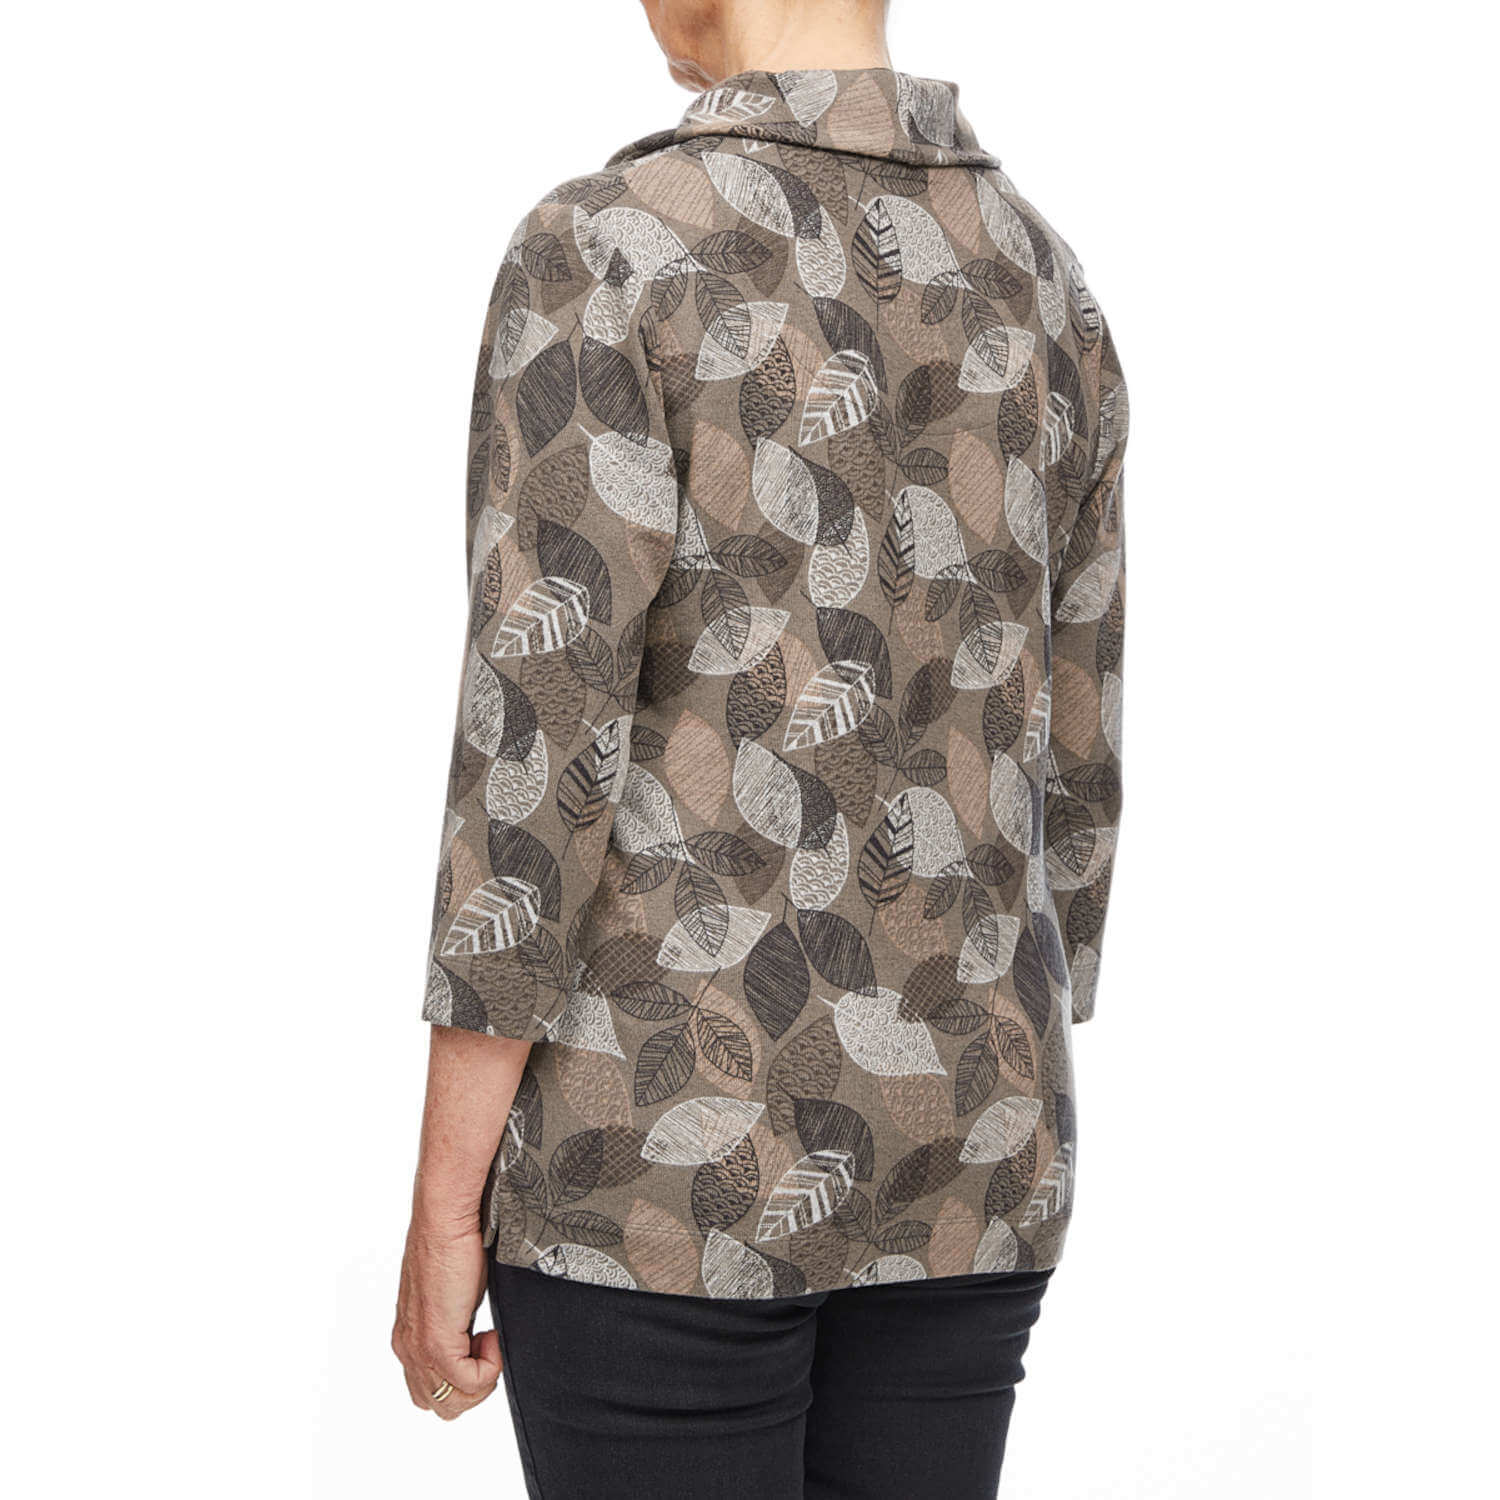 Tigiwear Leaf Print Cowl Neck Top- Taupe 3 Shaws Department Stores